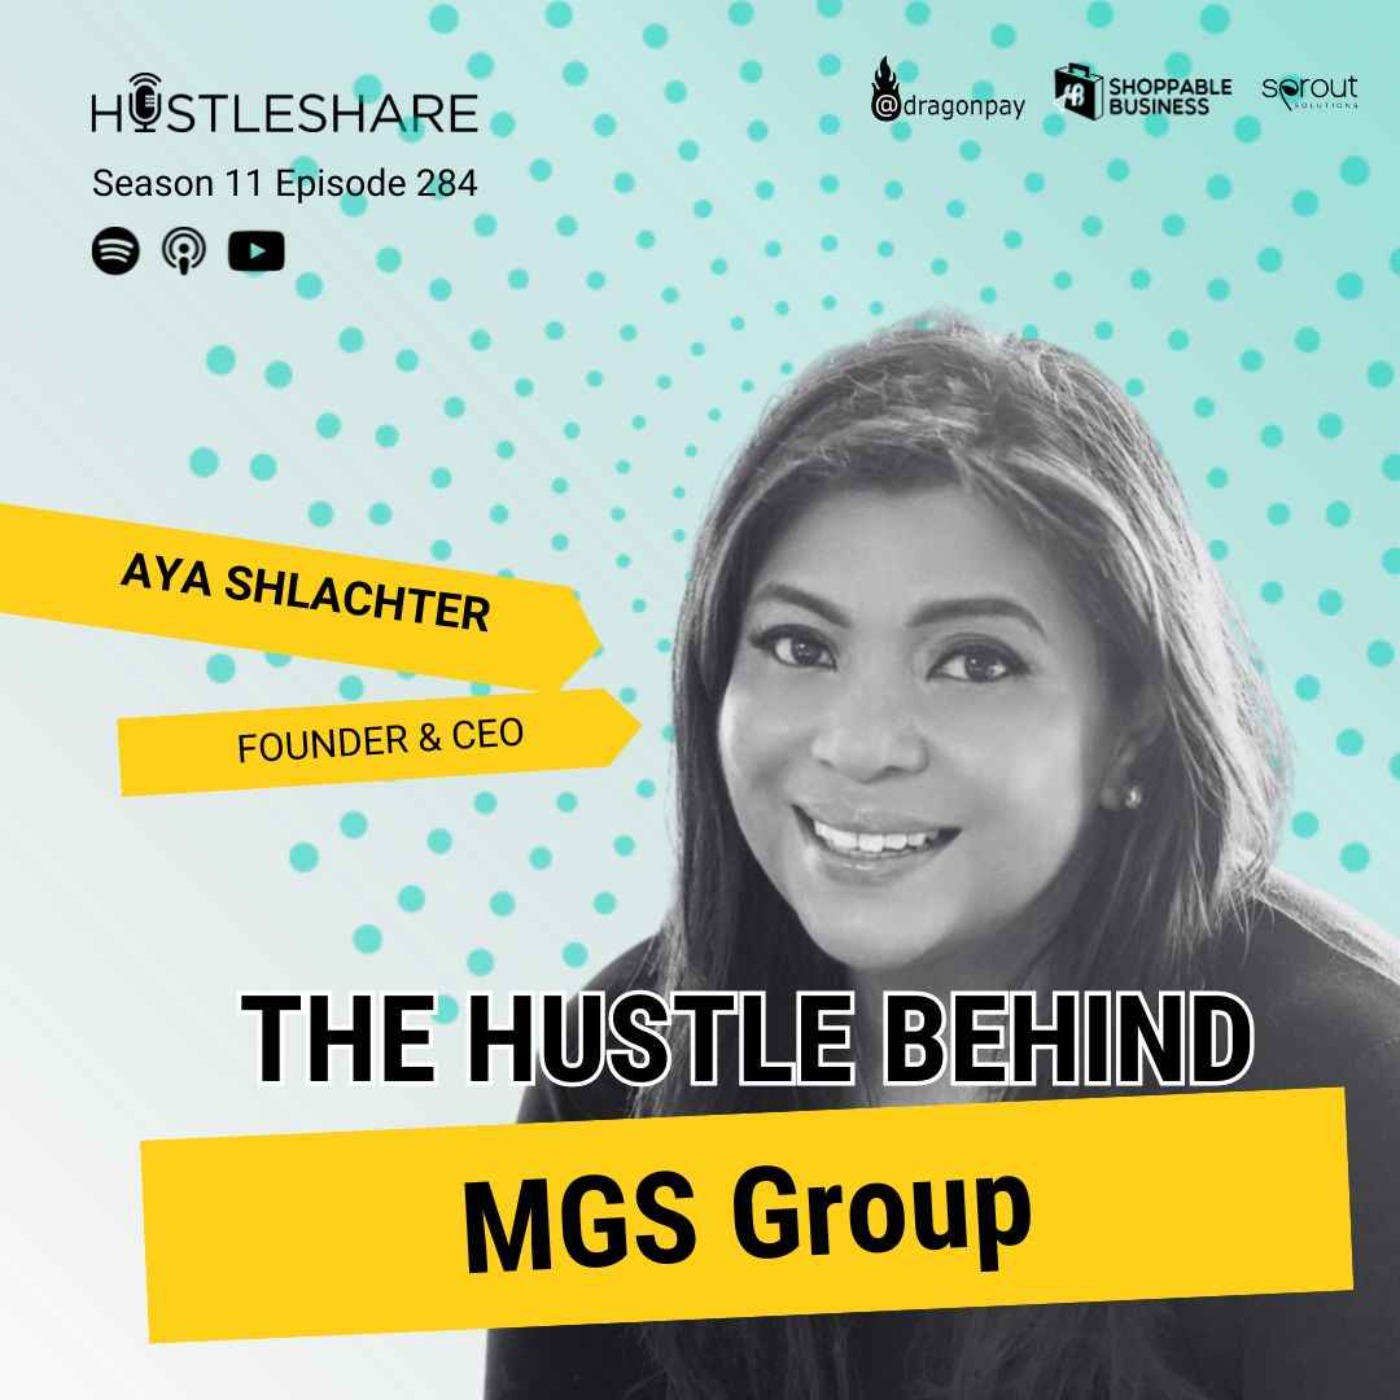 Aya Shlachter - The Hustle Behind MGS Group